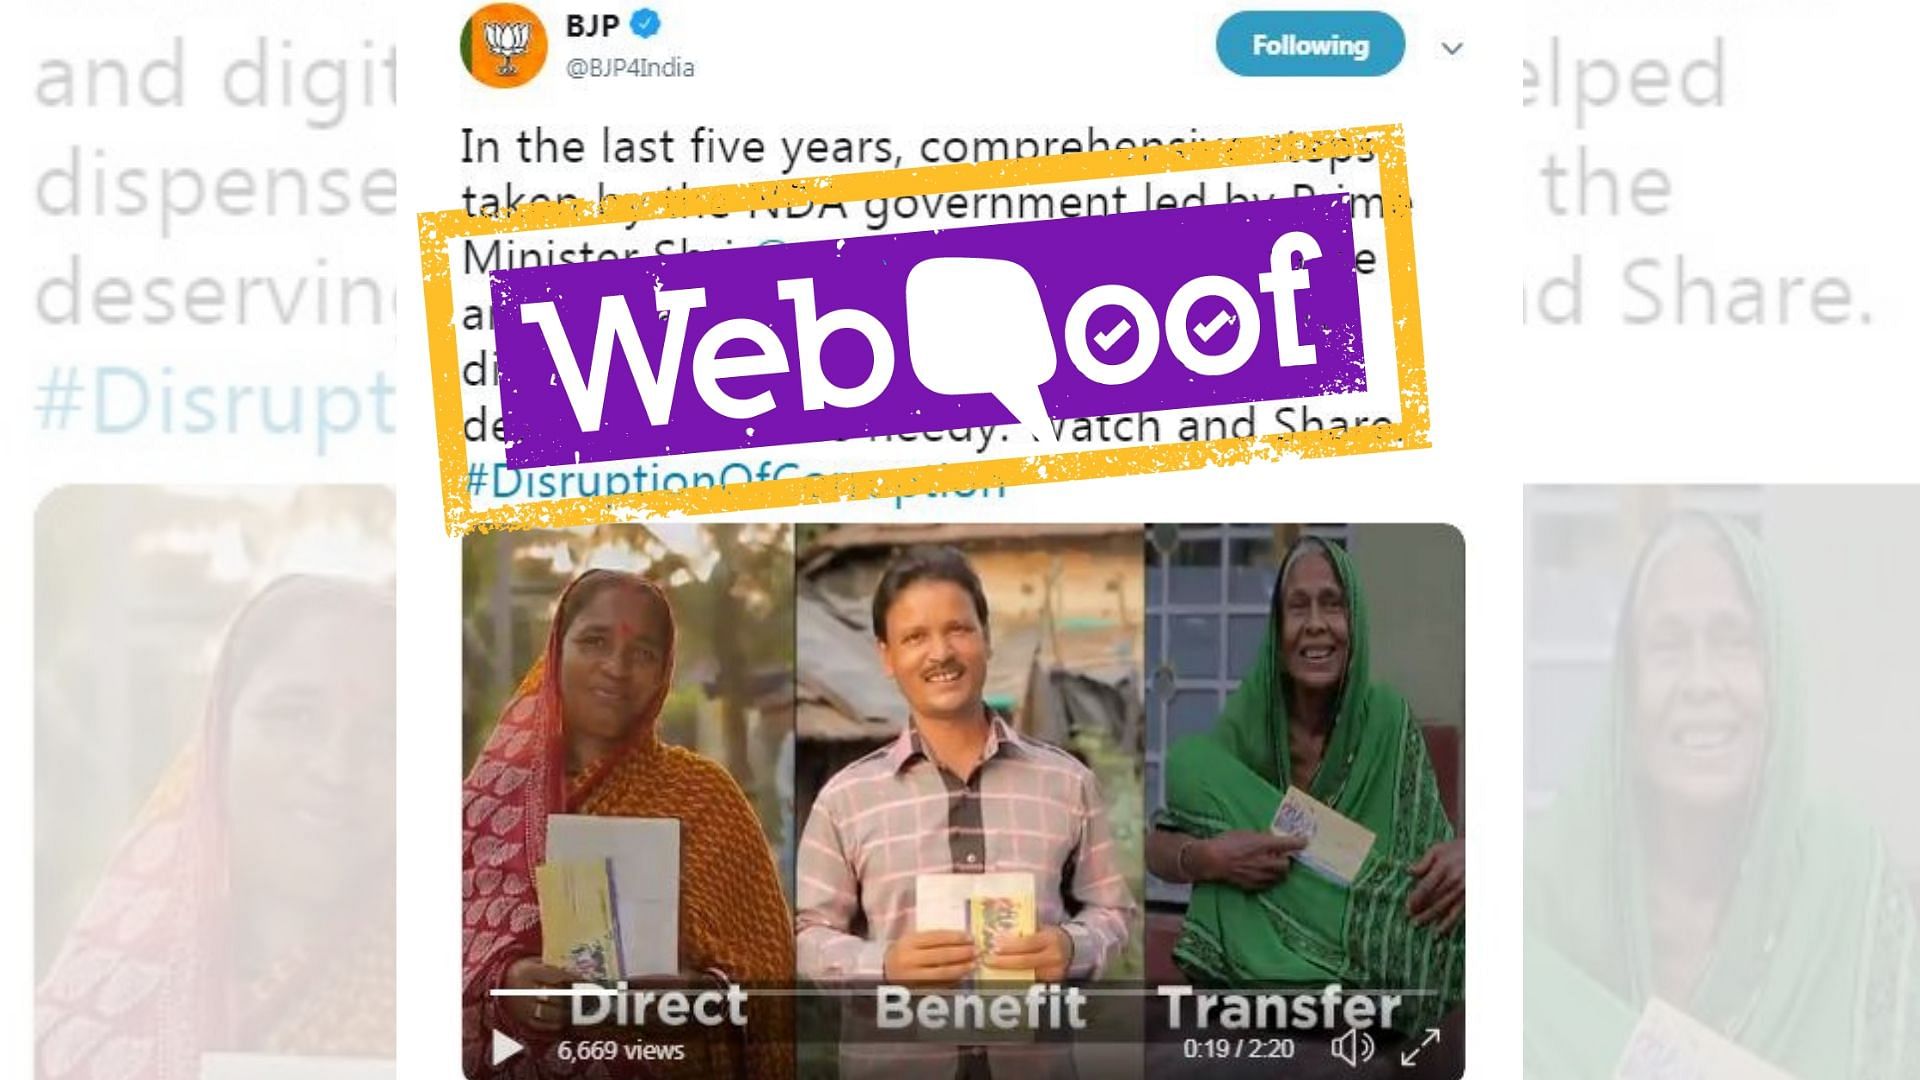 The BJP posted a video on Twitter which claims that Direct Benefit Transfer scheme was brought in by them.